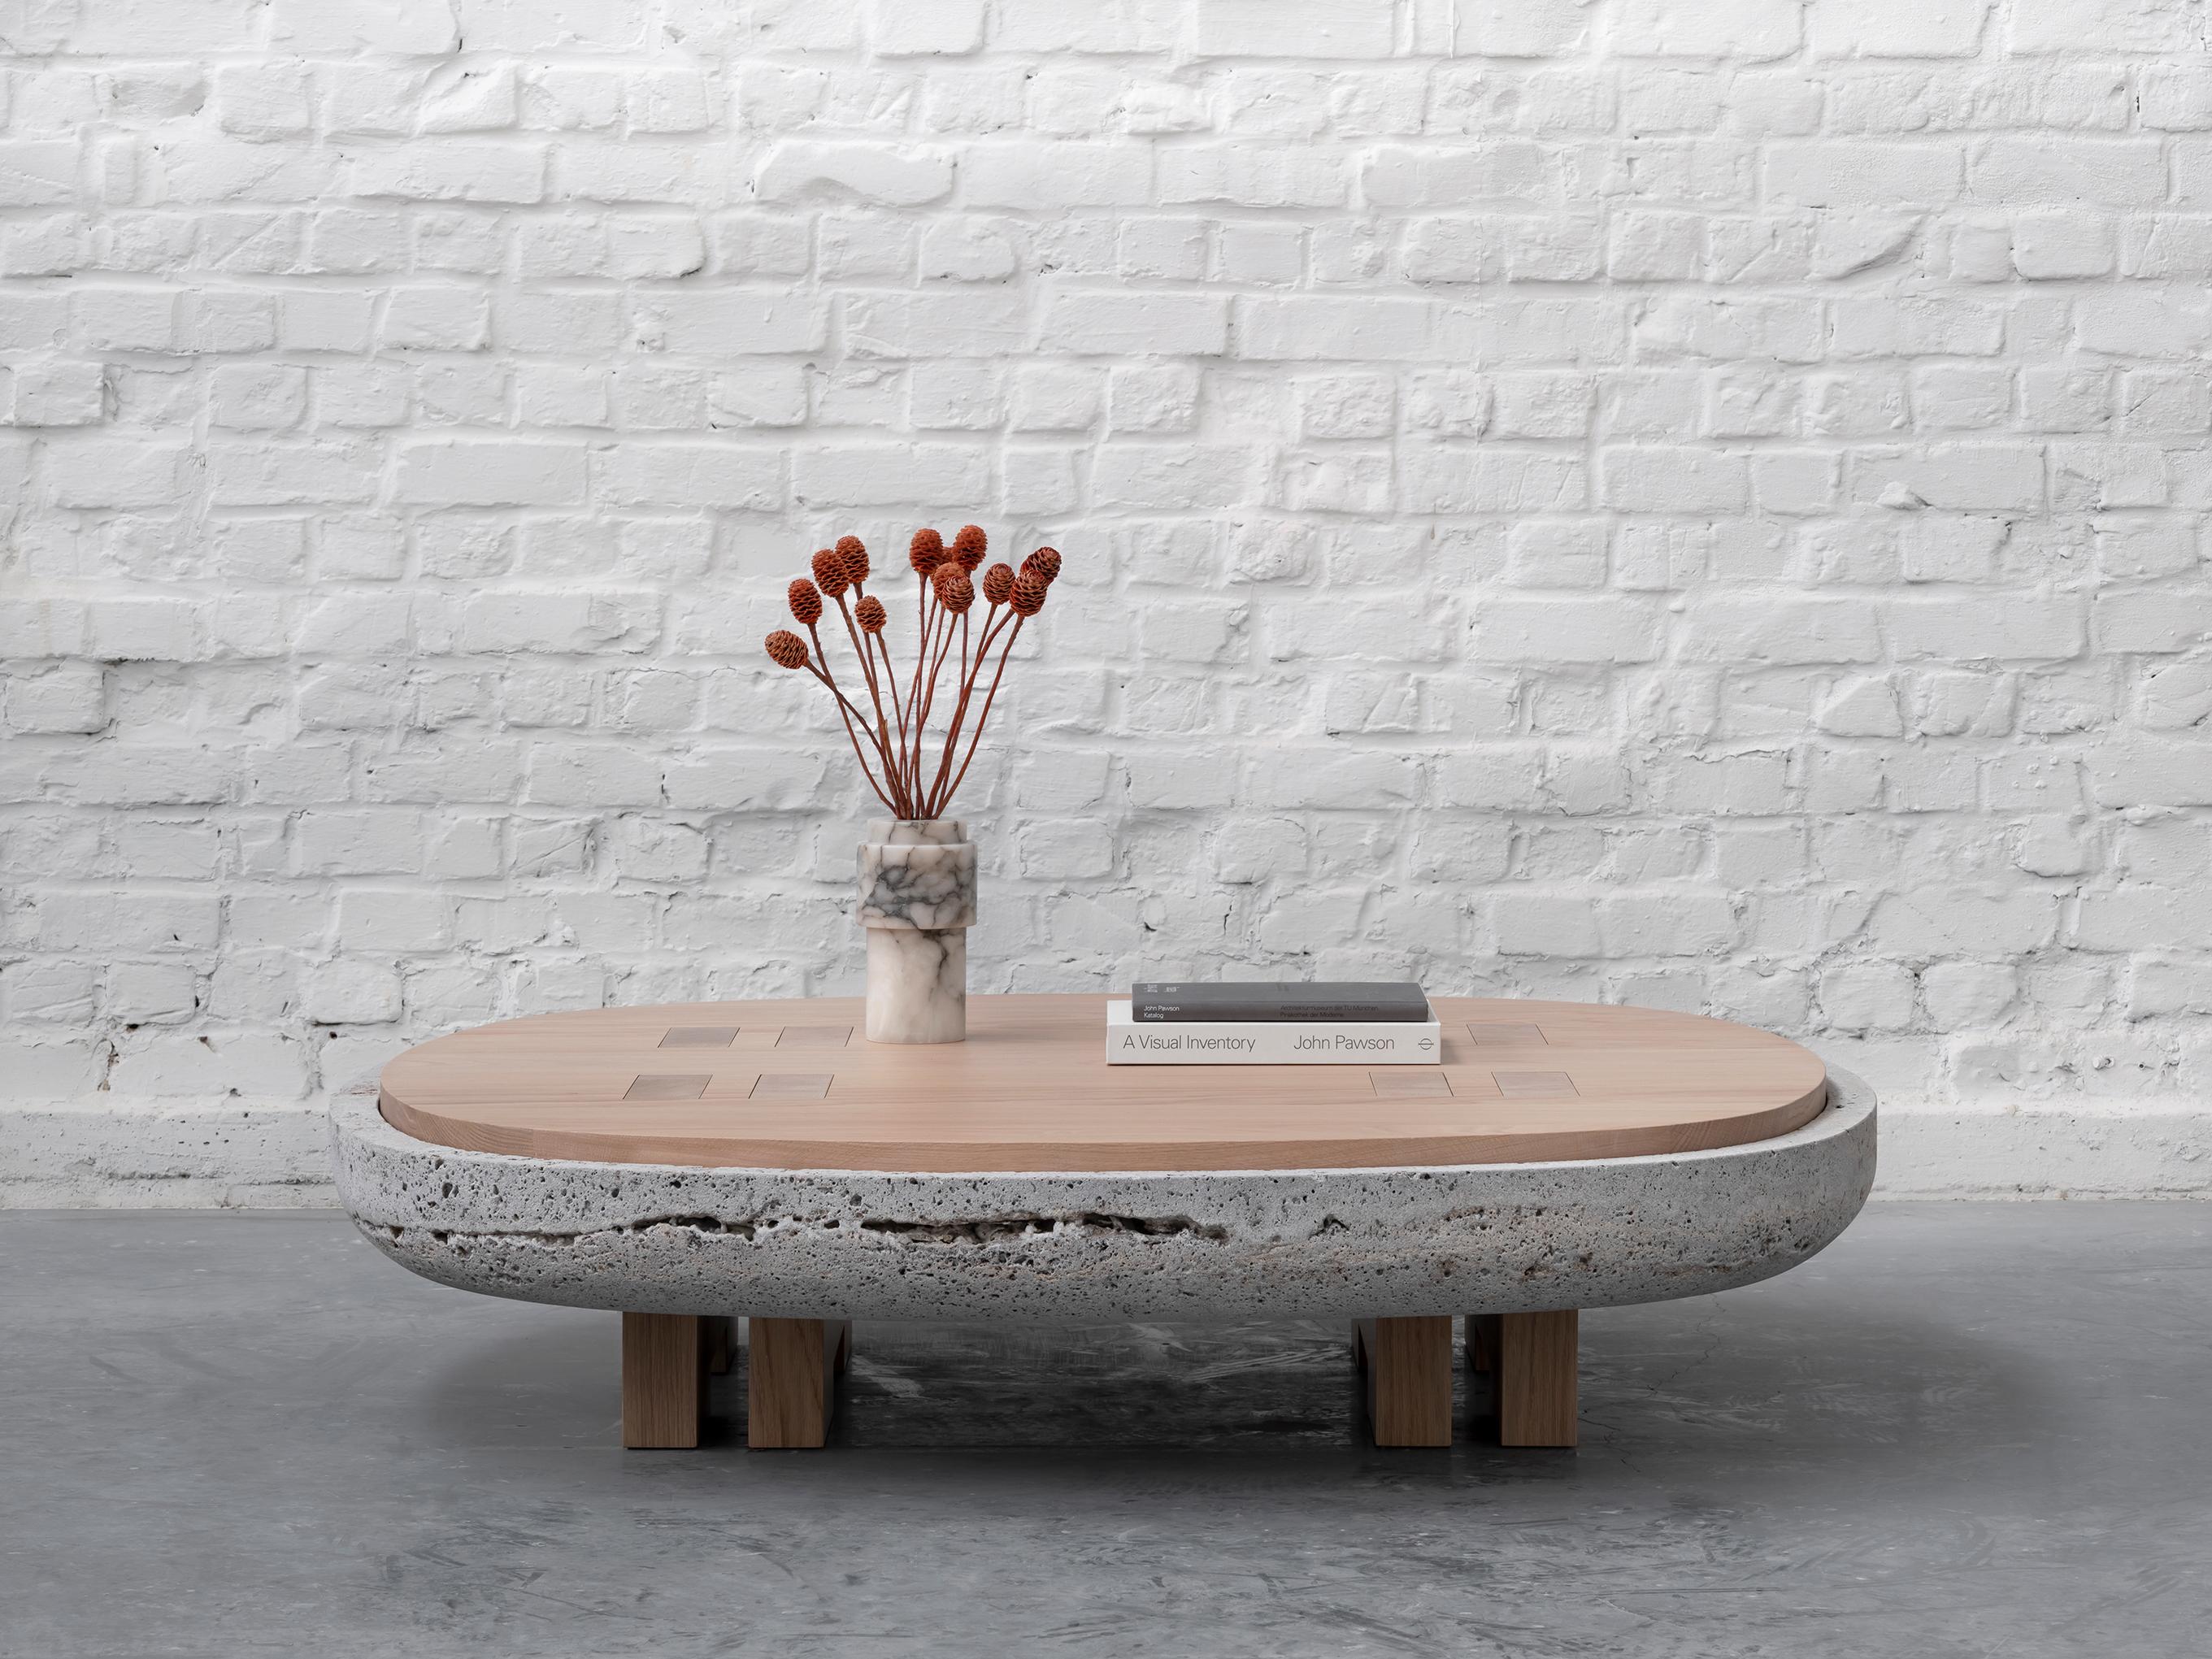 Rift coffee table stone by Andy Kerstens
Dimensions: 108 x 108 x 28cm
Materials: Travertino Silver, Bleached Oak, Stone, Metal patinated bronze
Other types of wood and sizes available, White washed European Larch, Bleached European Oak, Dark Stained